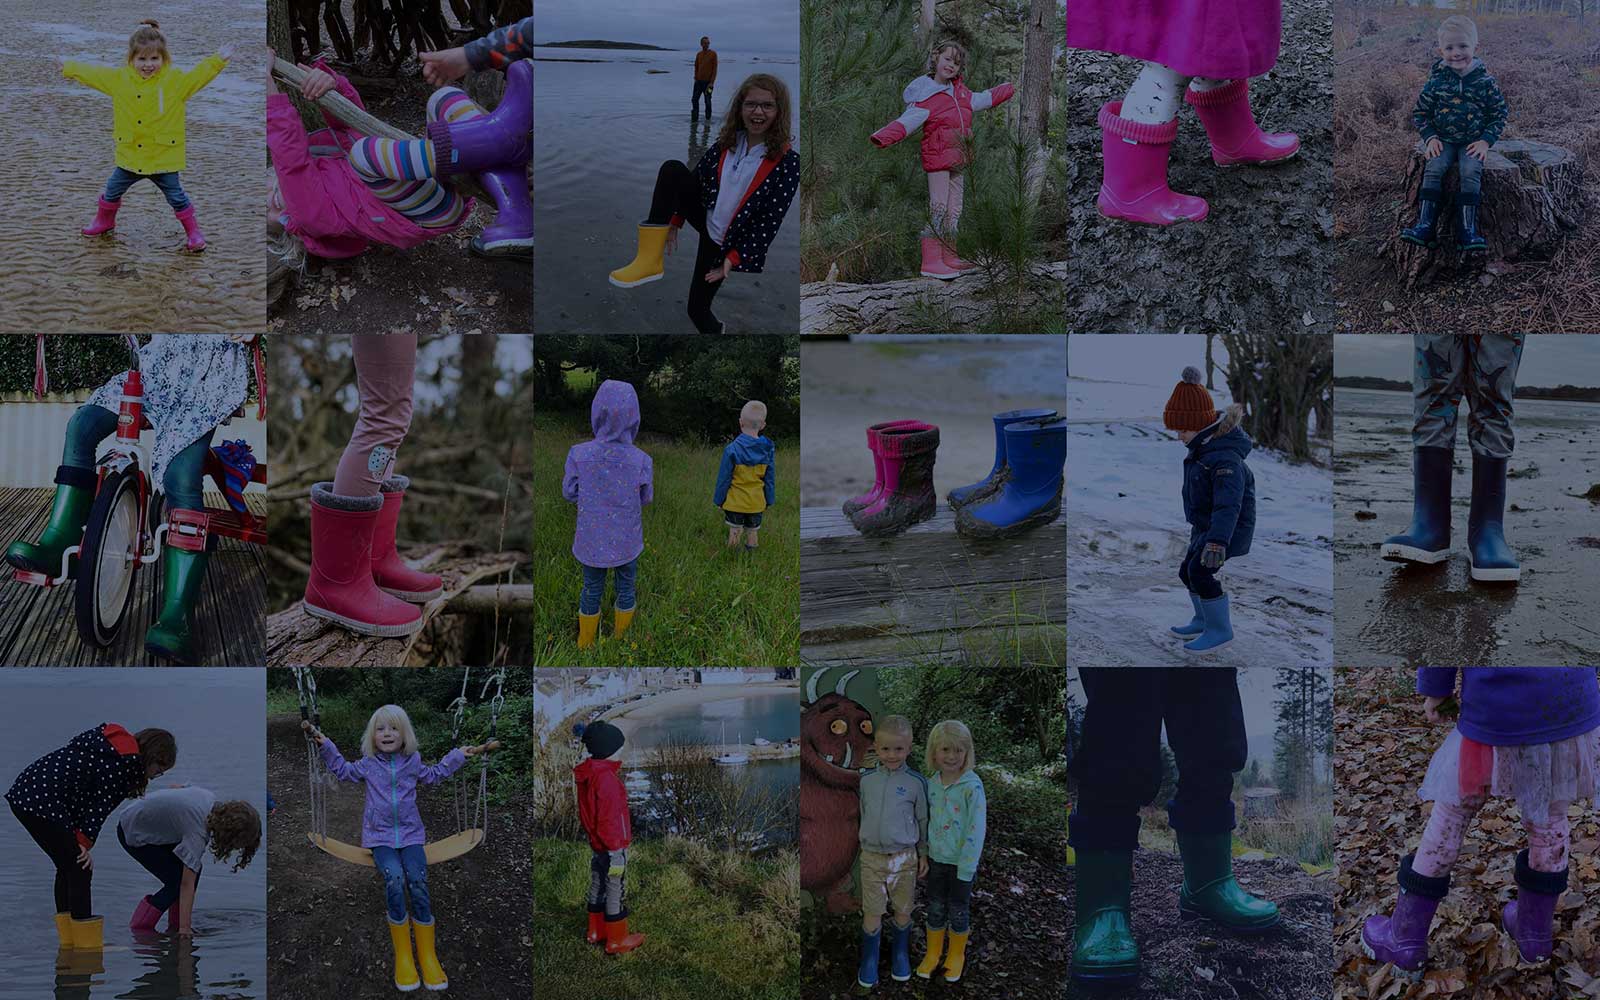 Boys & girls wellies and wellington boots available here from Term Footwear. fitted with an elasticated sock for comfort and protection. These kids wellington boots can deal with the muddiest of puddles.